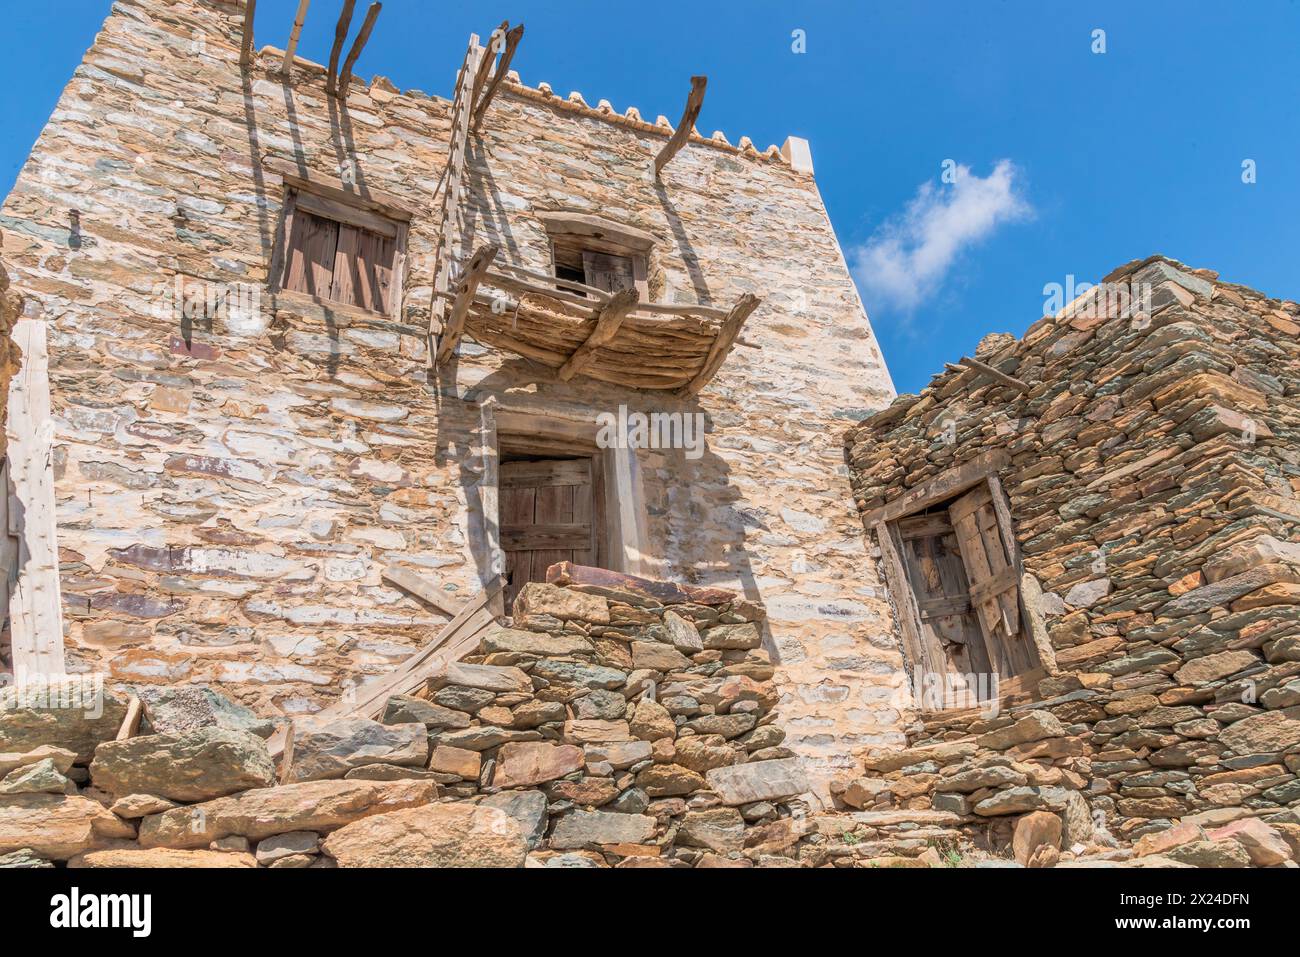 An ancient castle constructed using stones in ancient architecture called Bakhroush Ben Alas Castle is situated in the Al Baha region of Saudi Arabia Stock Photo